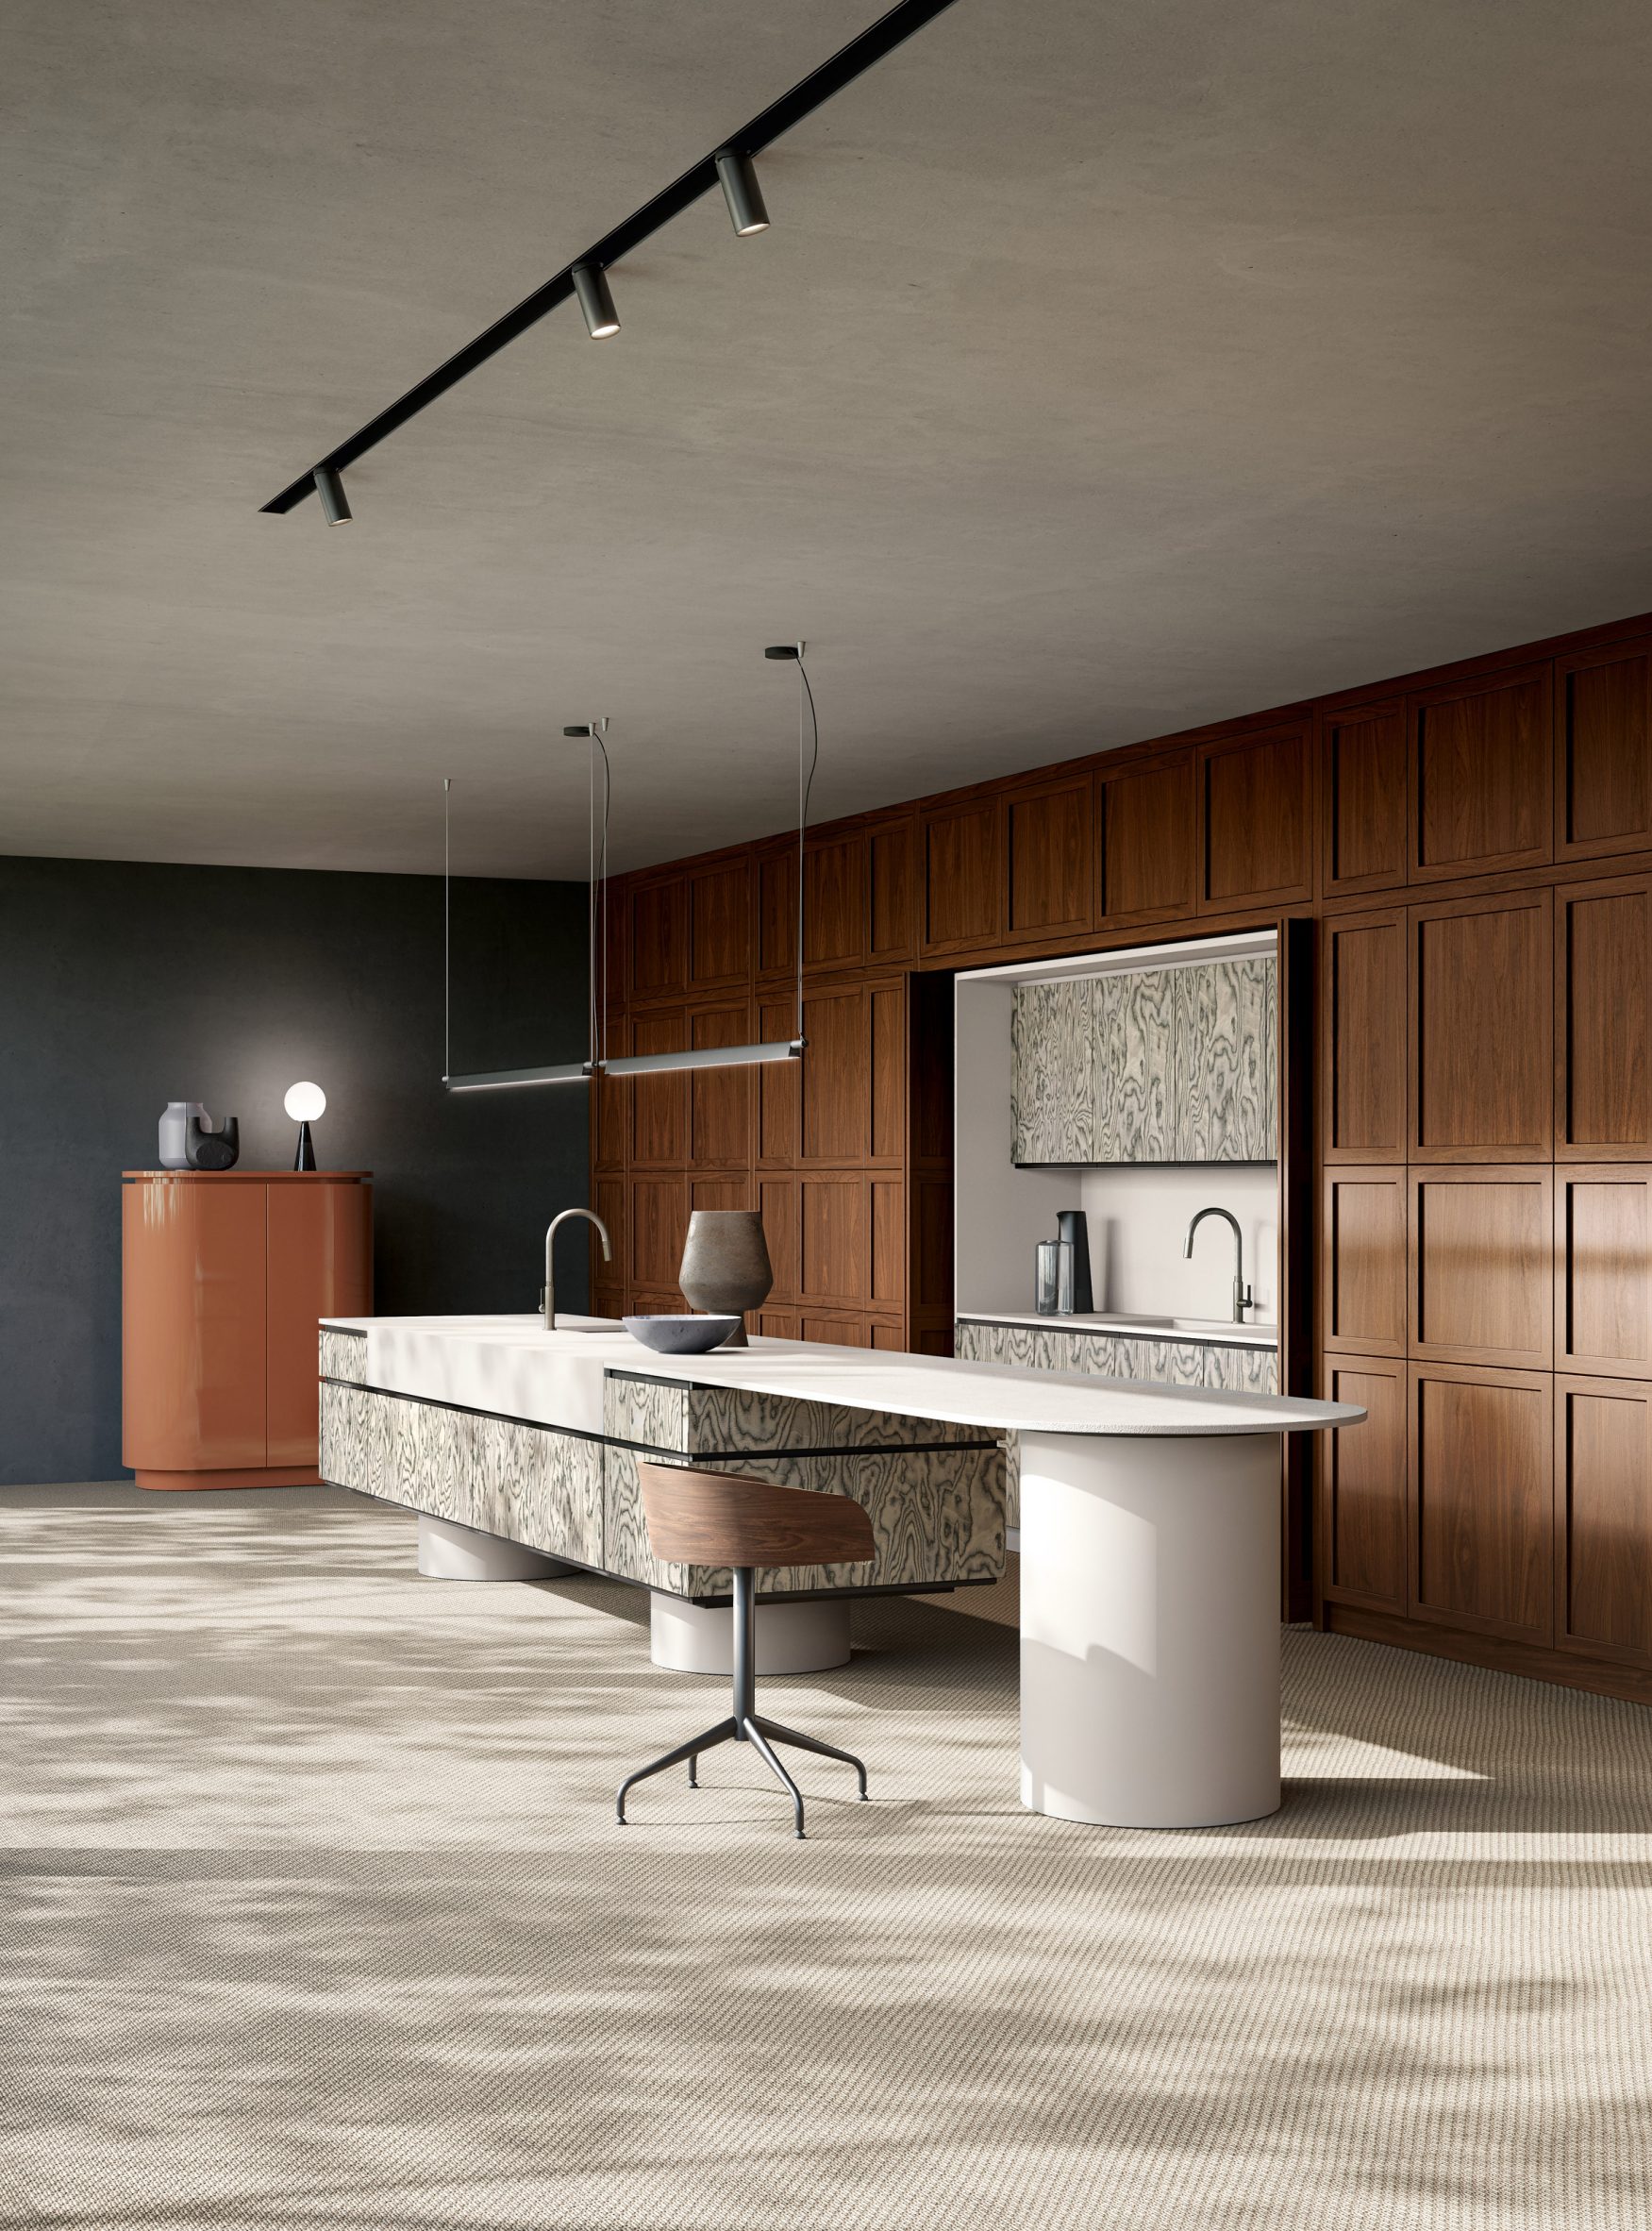 Atlante panelling system by L'ottocento